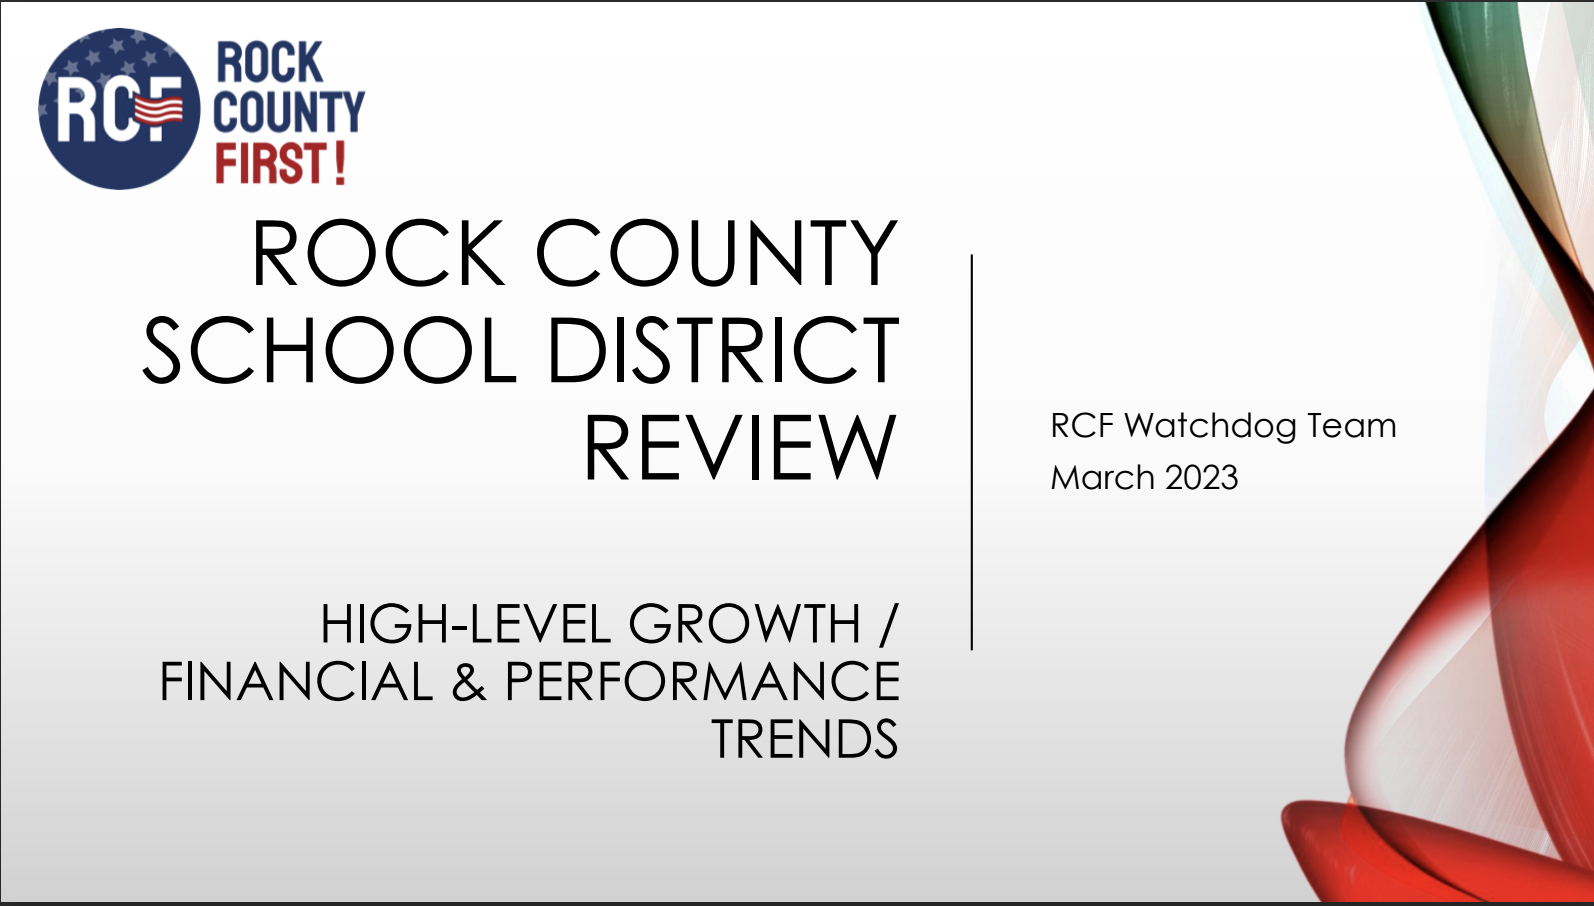 Rock County School District Review, High-level growth / financial & performance trends - March 2023. 